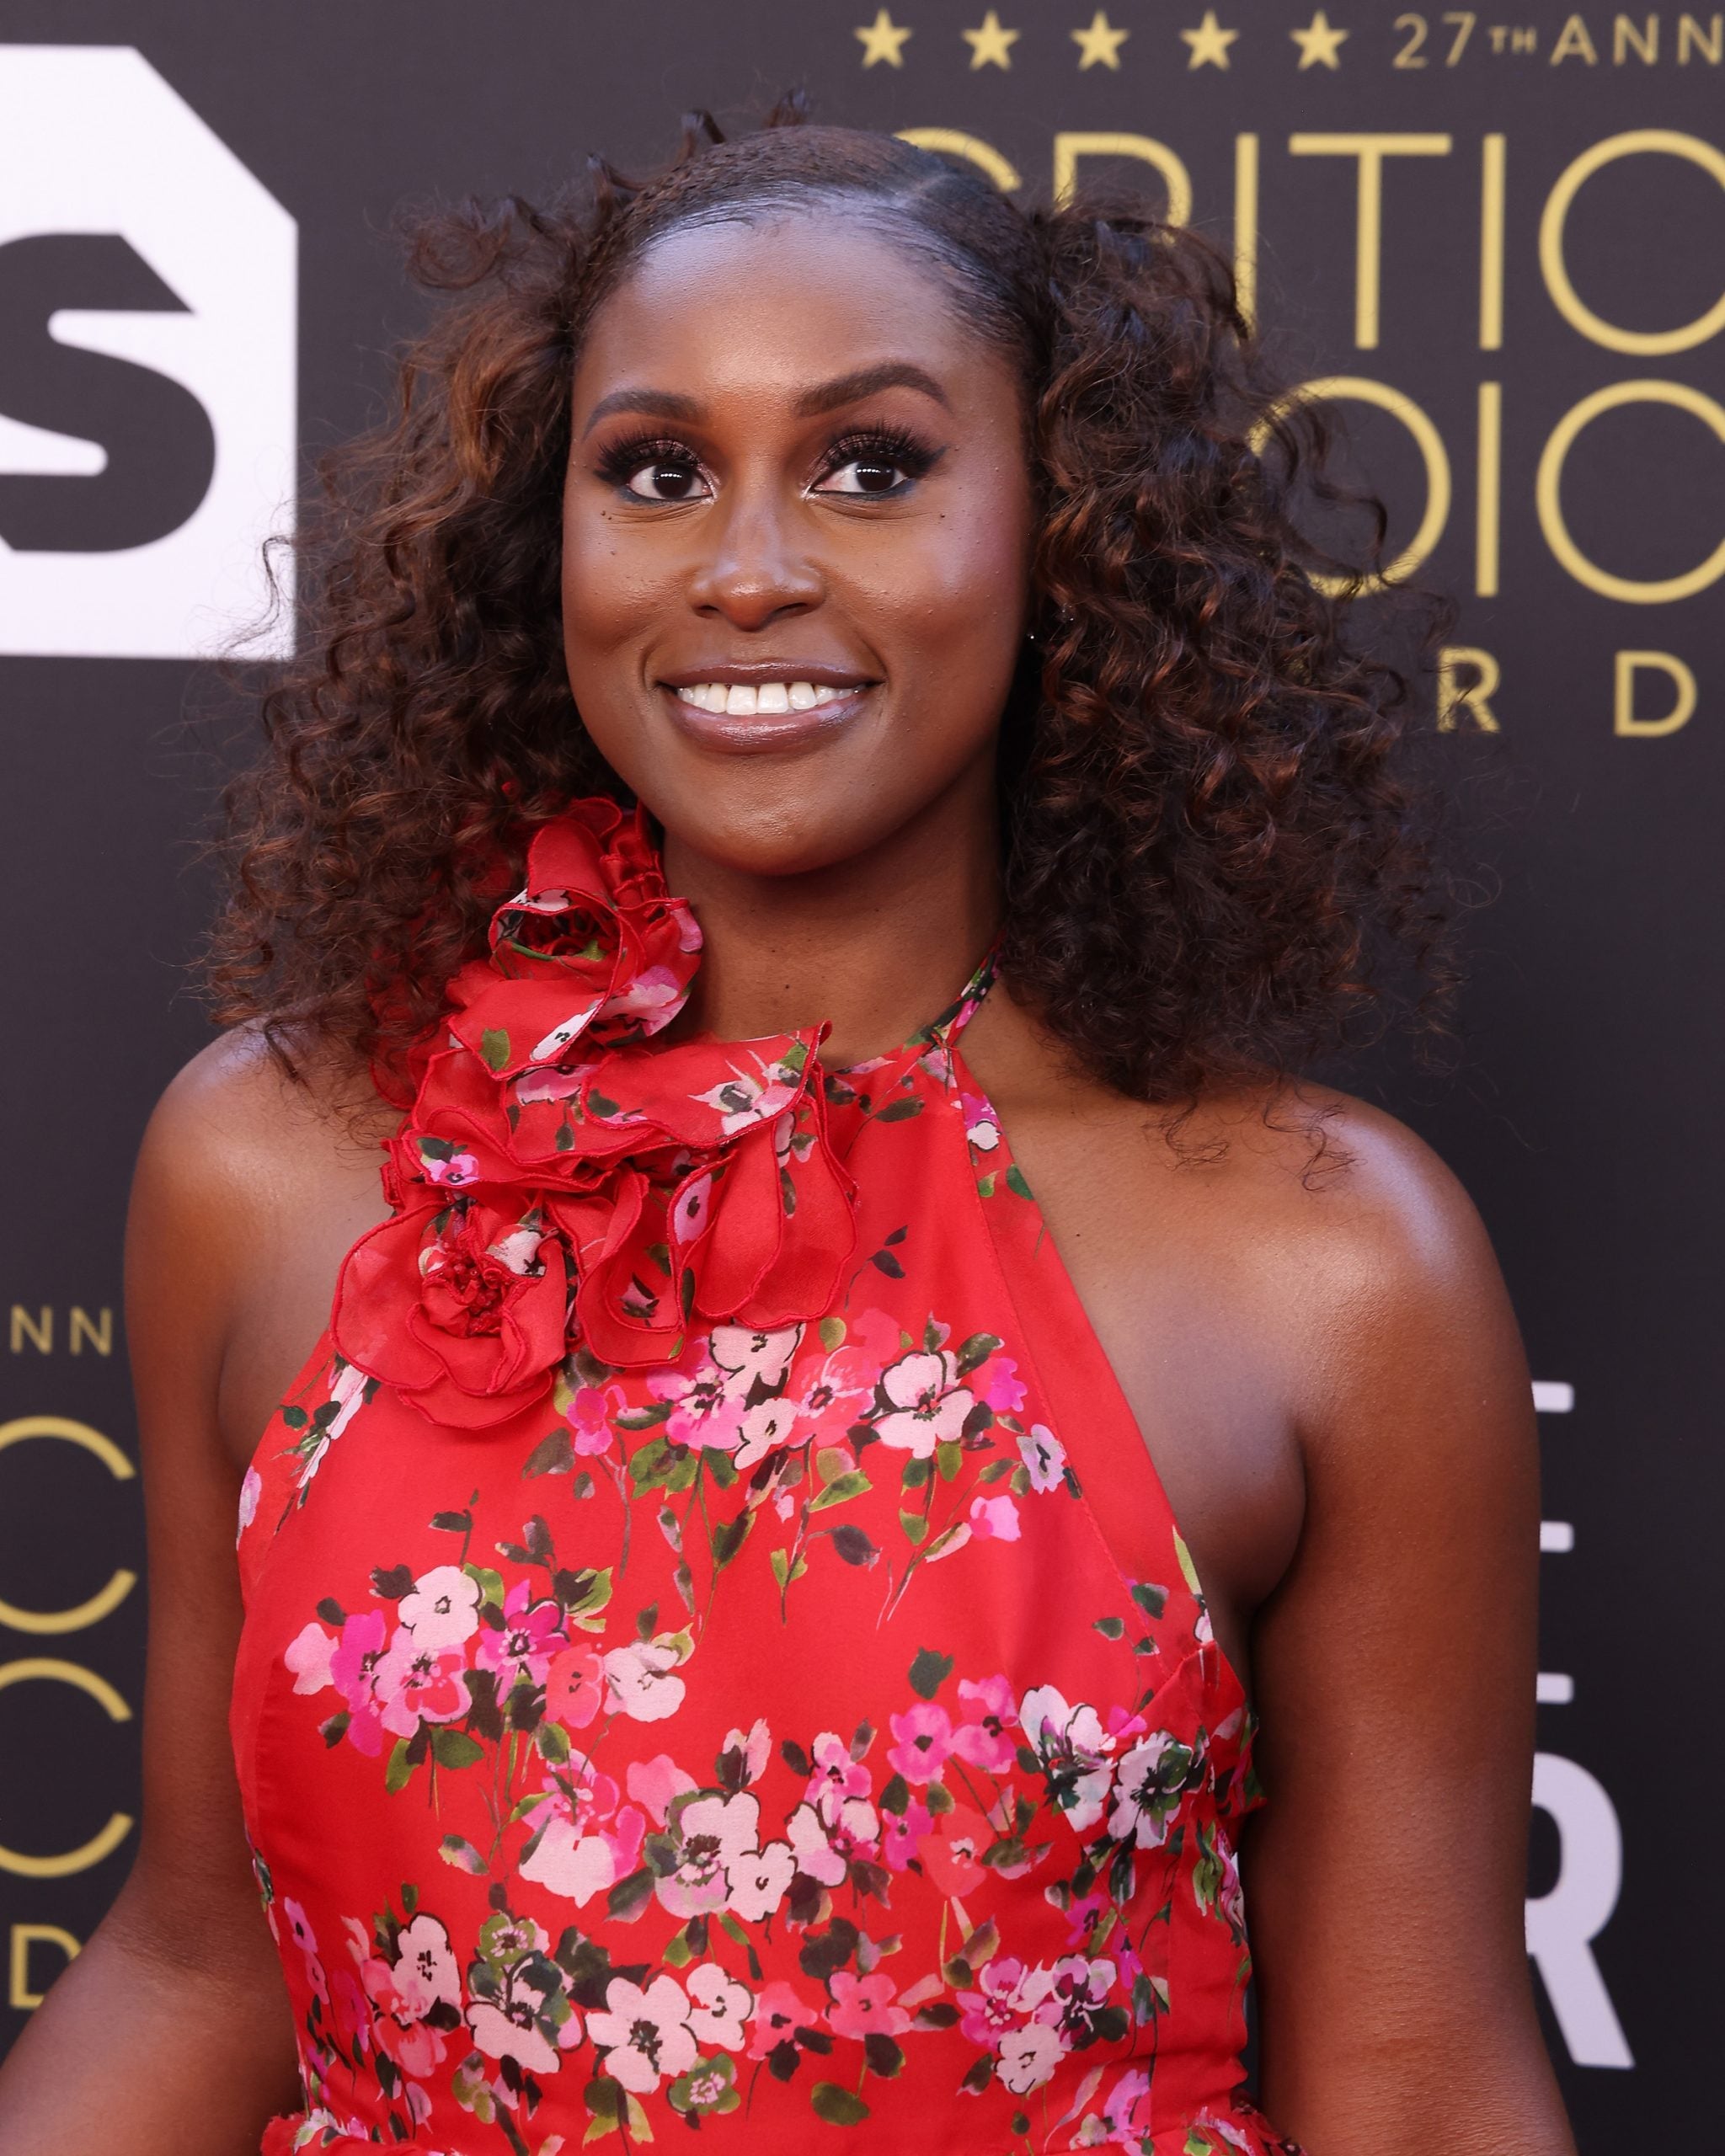 American Black Film Festival Returns To Miami With Issa Rae, Yahya Abdul Mateen II, And More